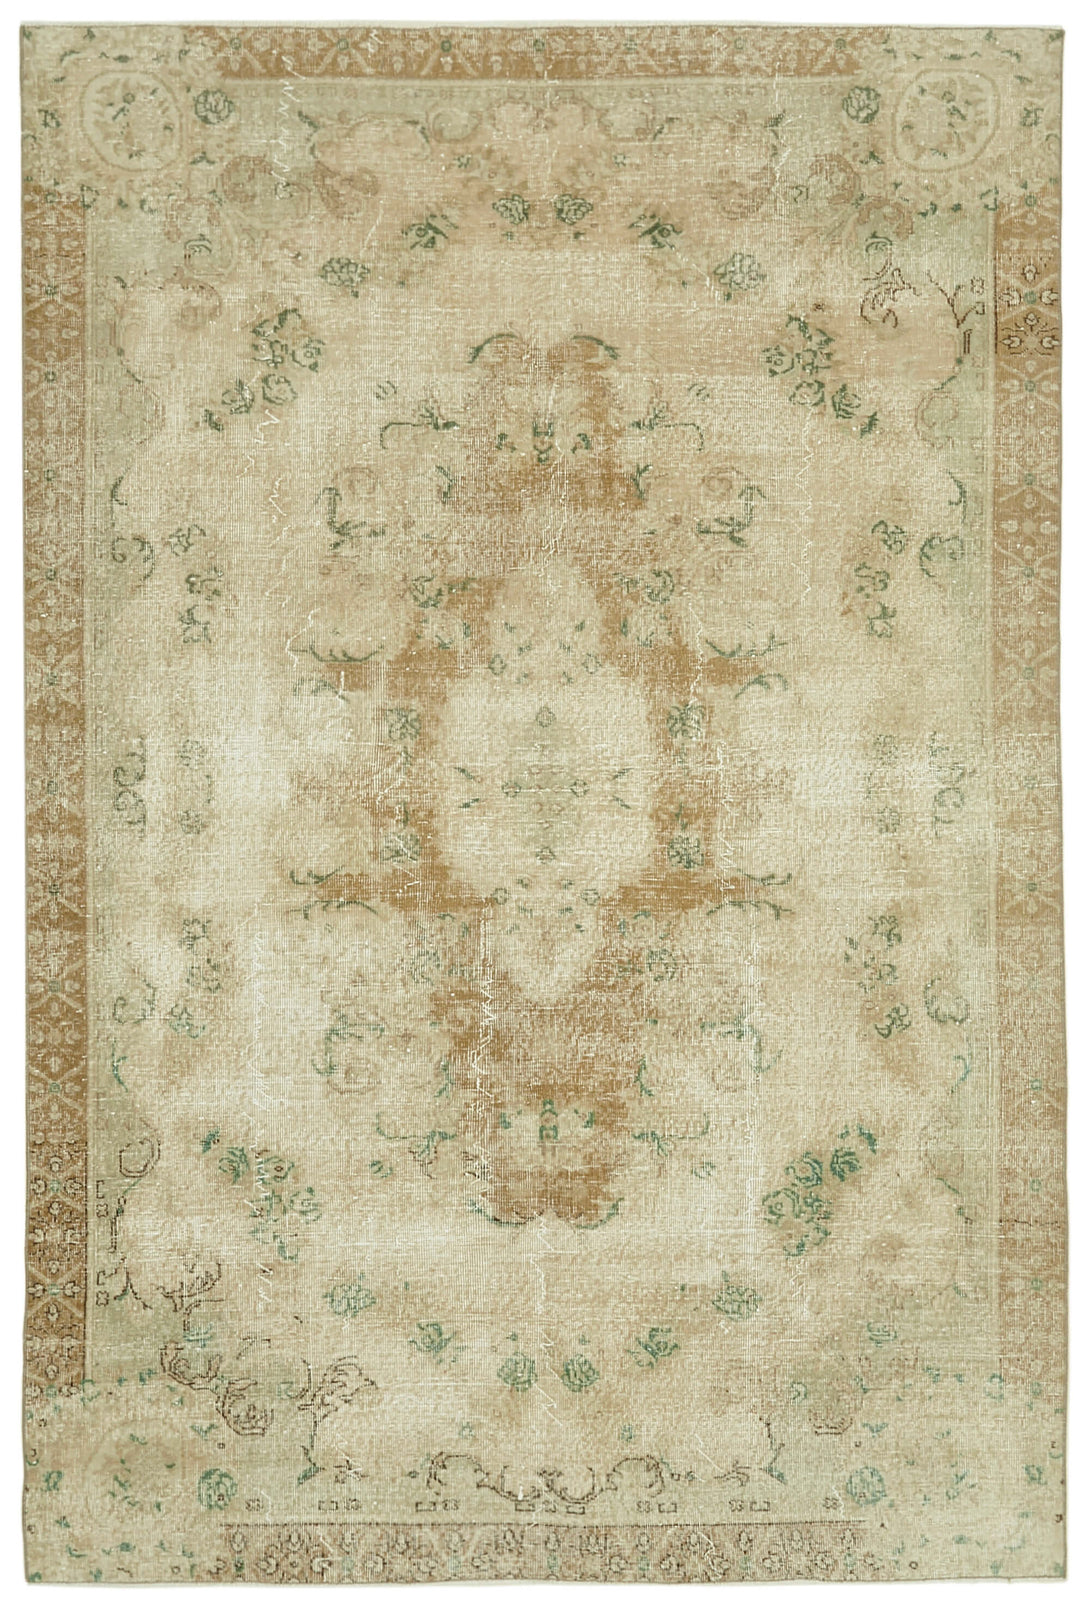 Handmade White Wash Area Rug > Design# OL-AC-41631 > Size: 6'-6" x 9'-8", Carpet Culture Rugs, Handmade Rugs, NYC Rugs, New Rugs, Shop Rugs, Rug Store, Outlet Rugs, SoHo Rugs, Rugs in USA